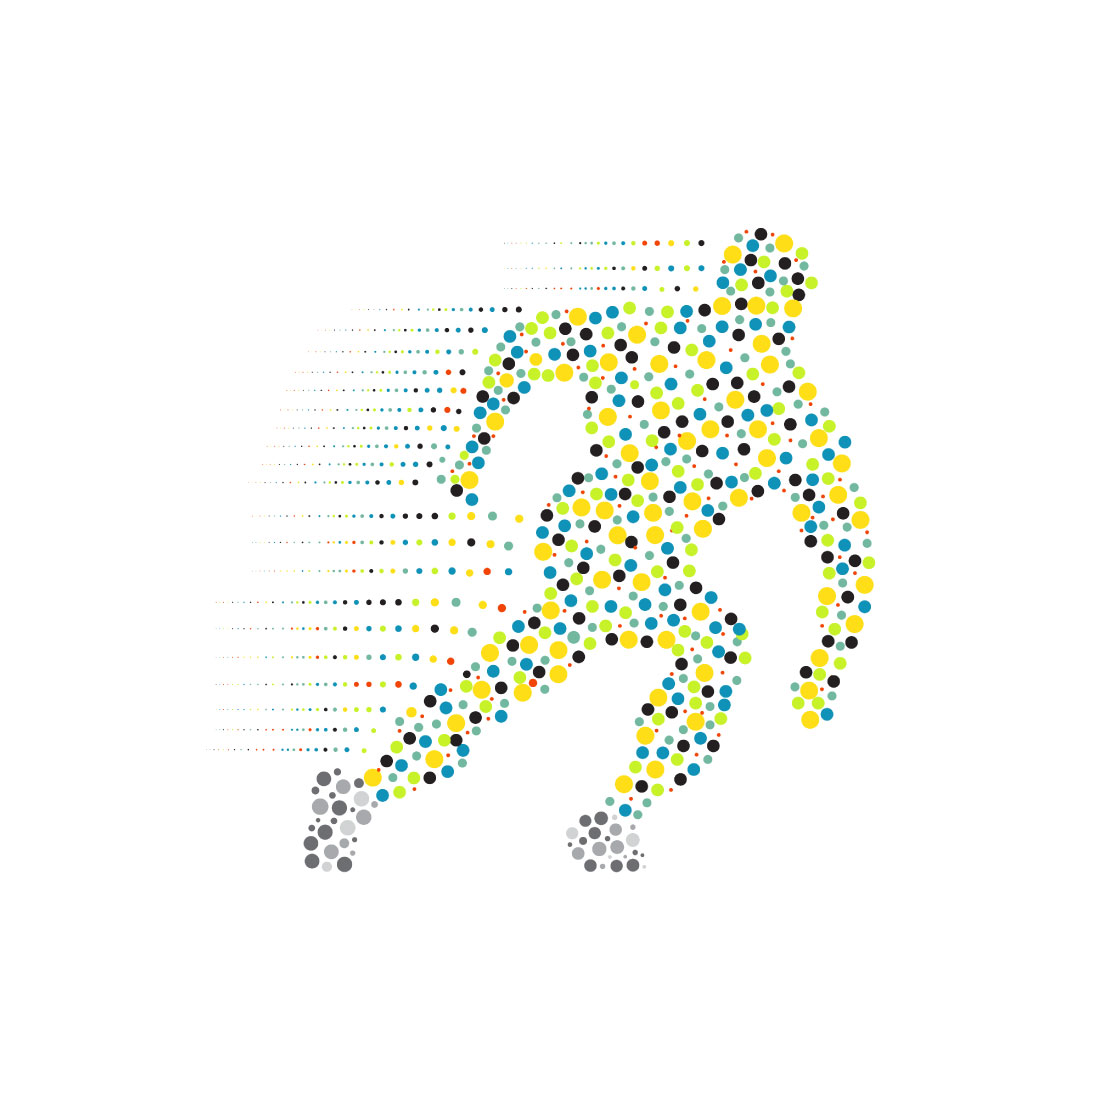 Speedy person composed of colored dots, vector illustration preview image.